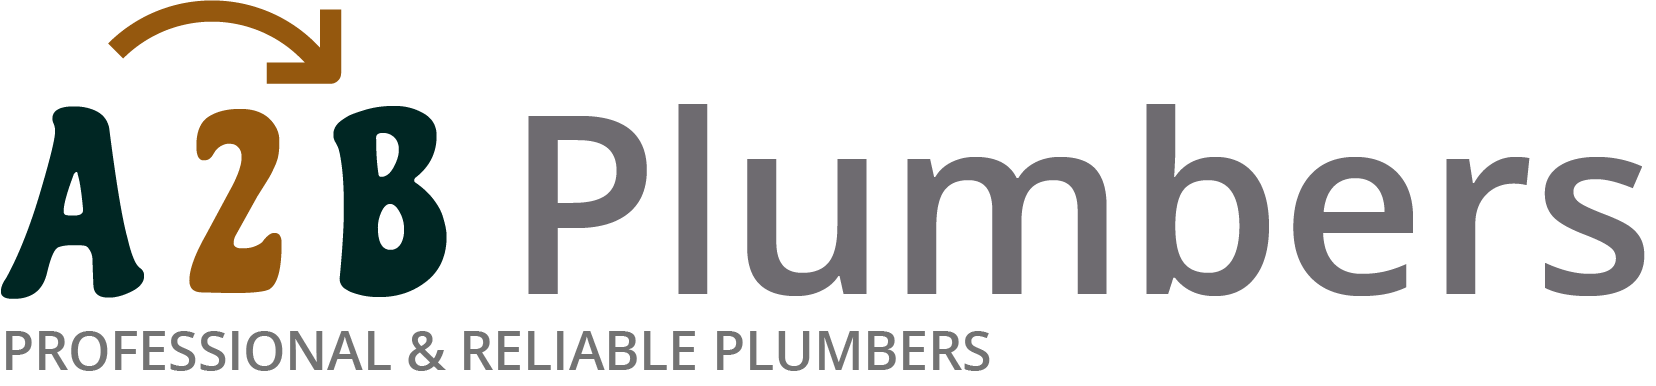 If you need a boiler installed, a radiator repaired or a leaking tap fixed, call us now - we provide services for properties in Norbury and the local area.